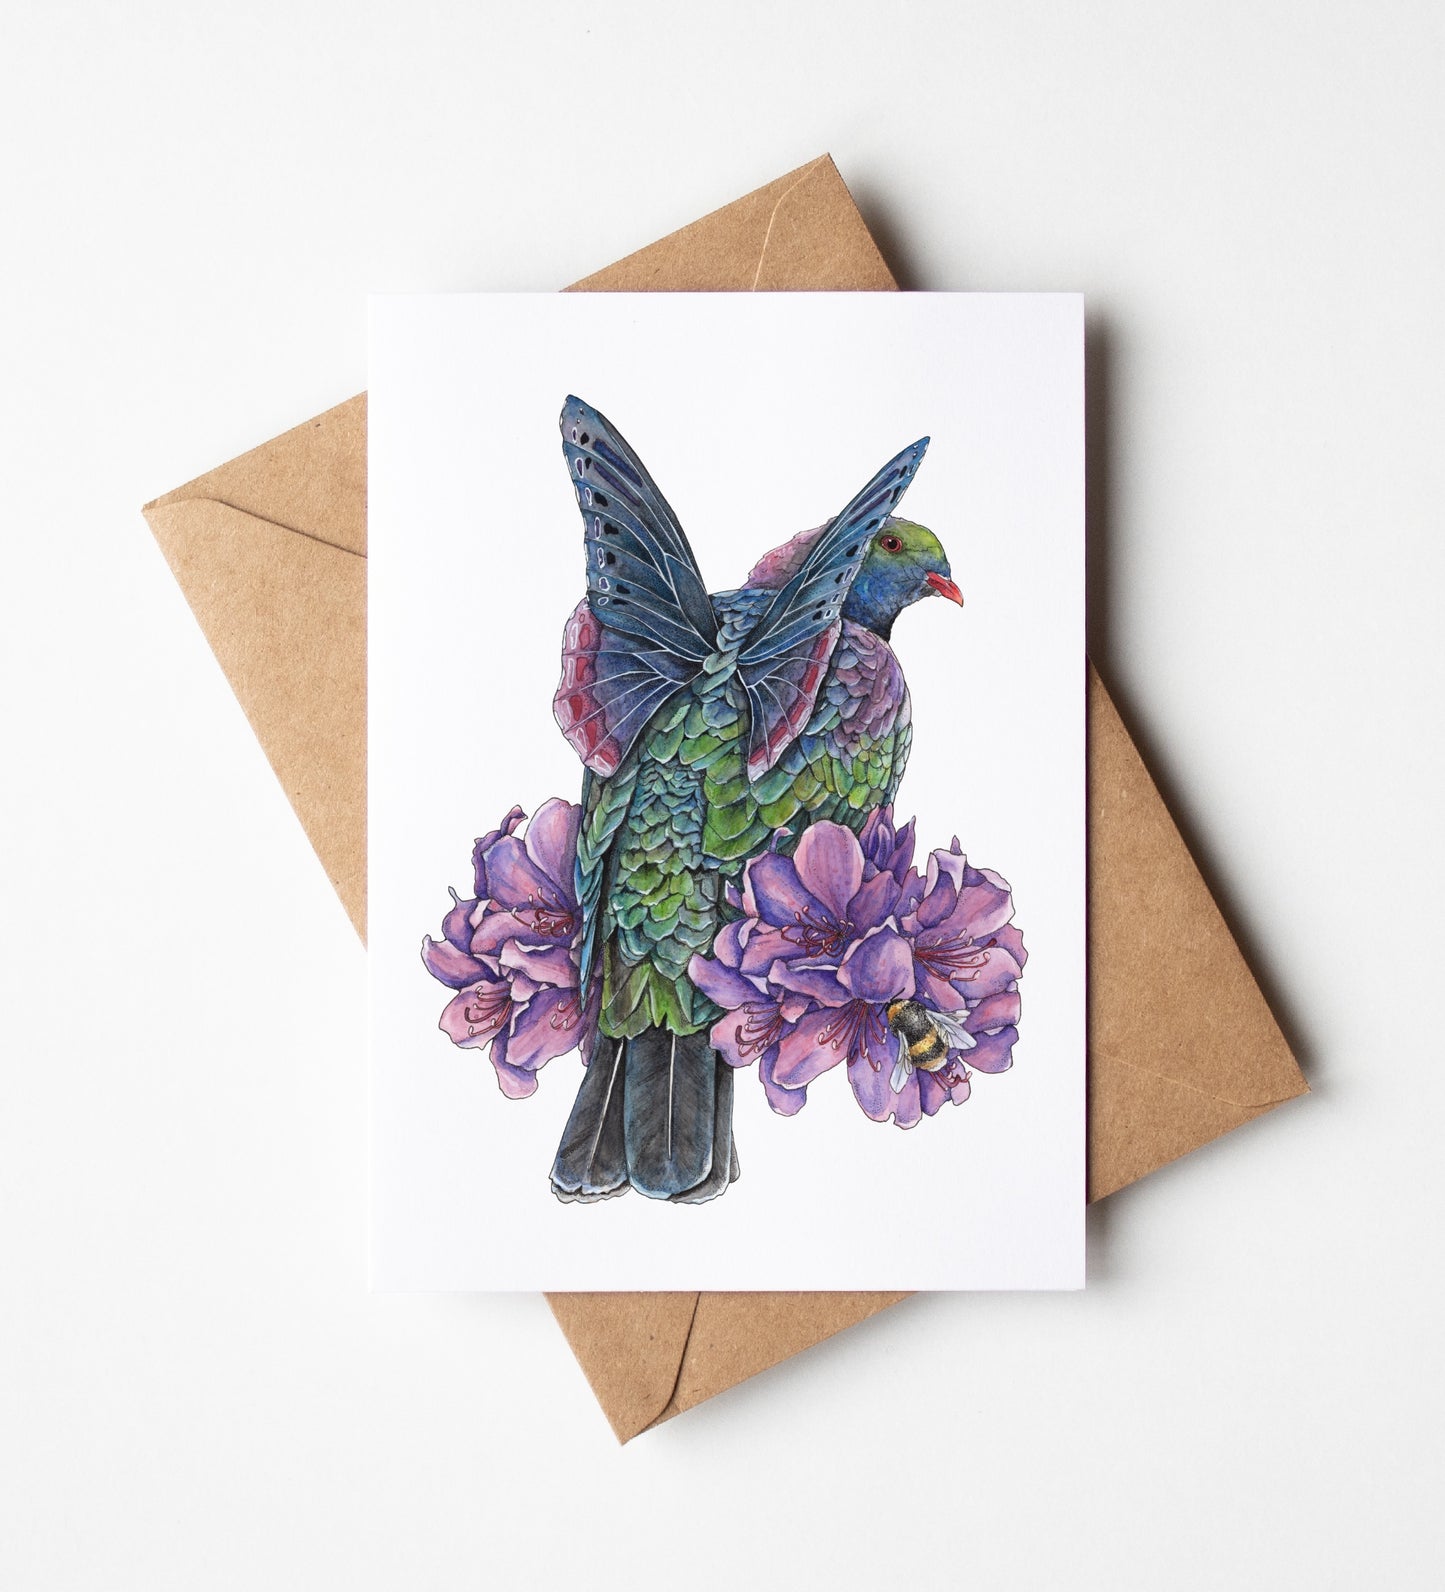 Kererū  on Rhododendron Greeting Card